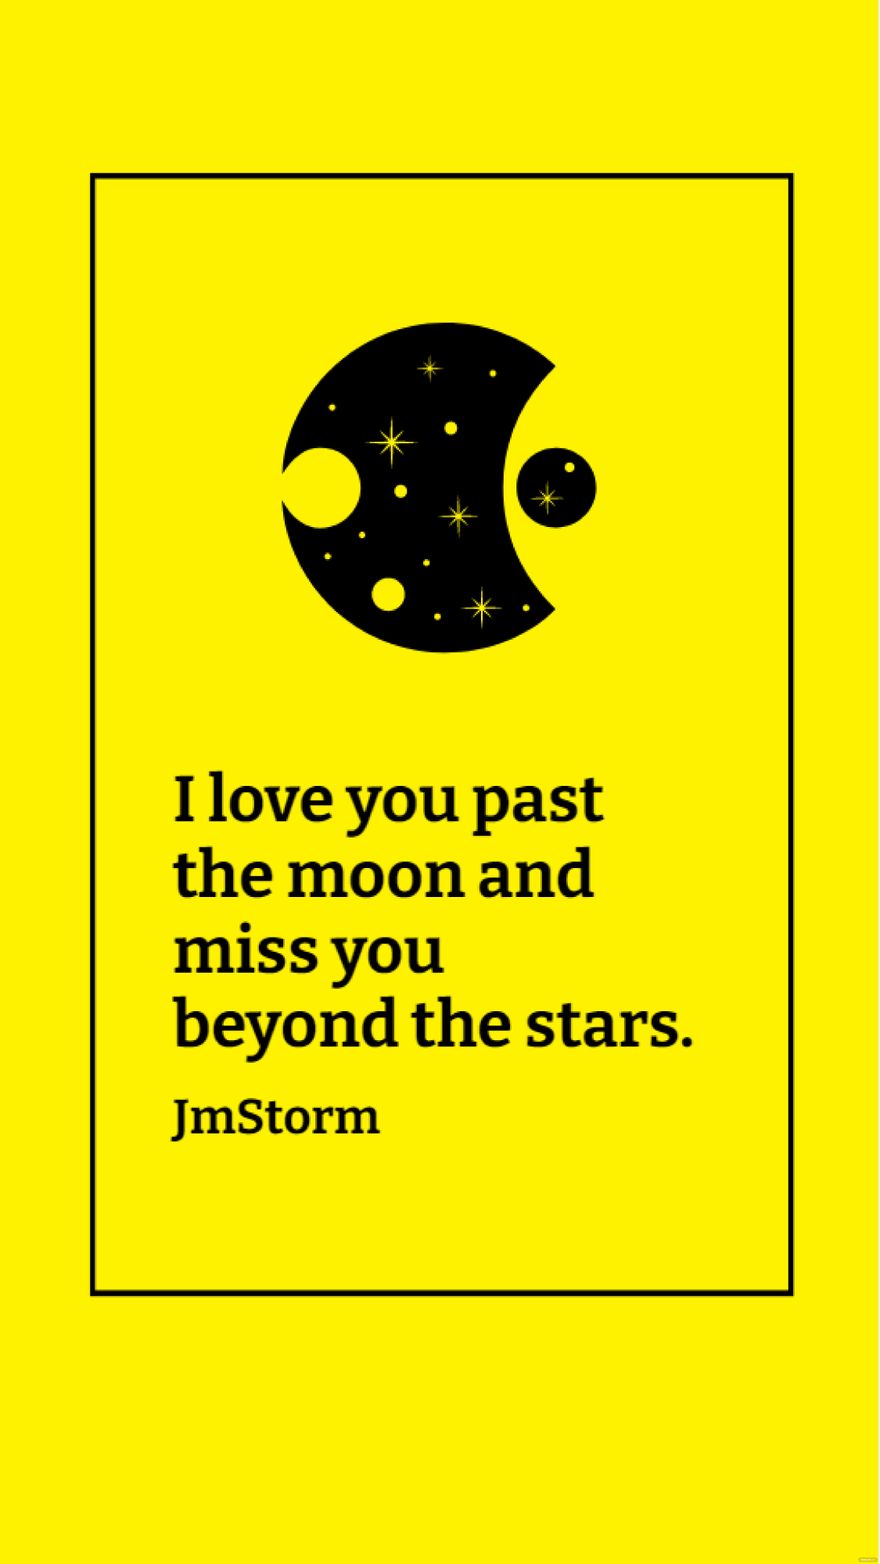 Free JmStorm - I love you past the moon and miss you beyond the stars. in JPG